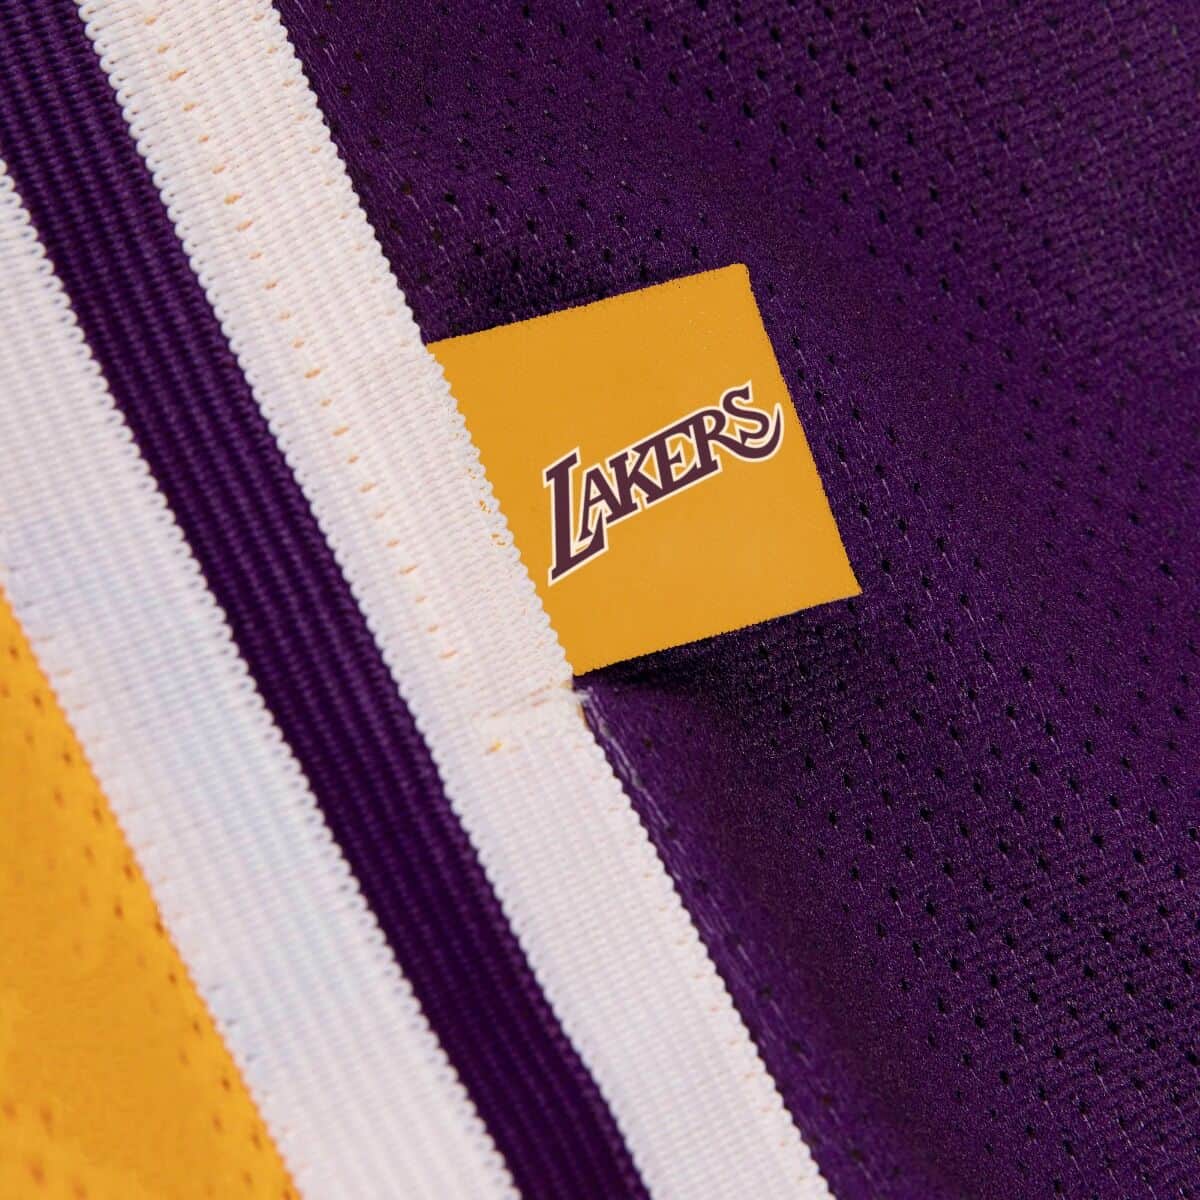 Mitchell & Ness Los Angeles Lakers Big Face 5.0 Shorts Yellow